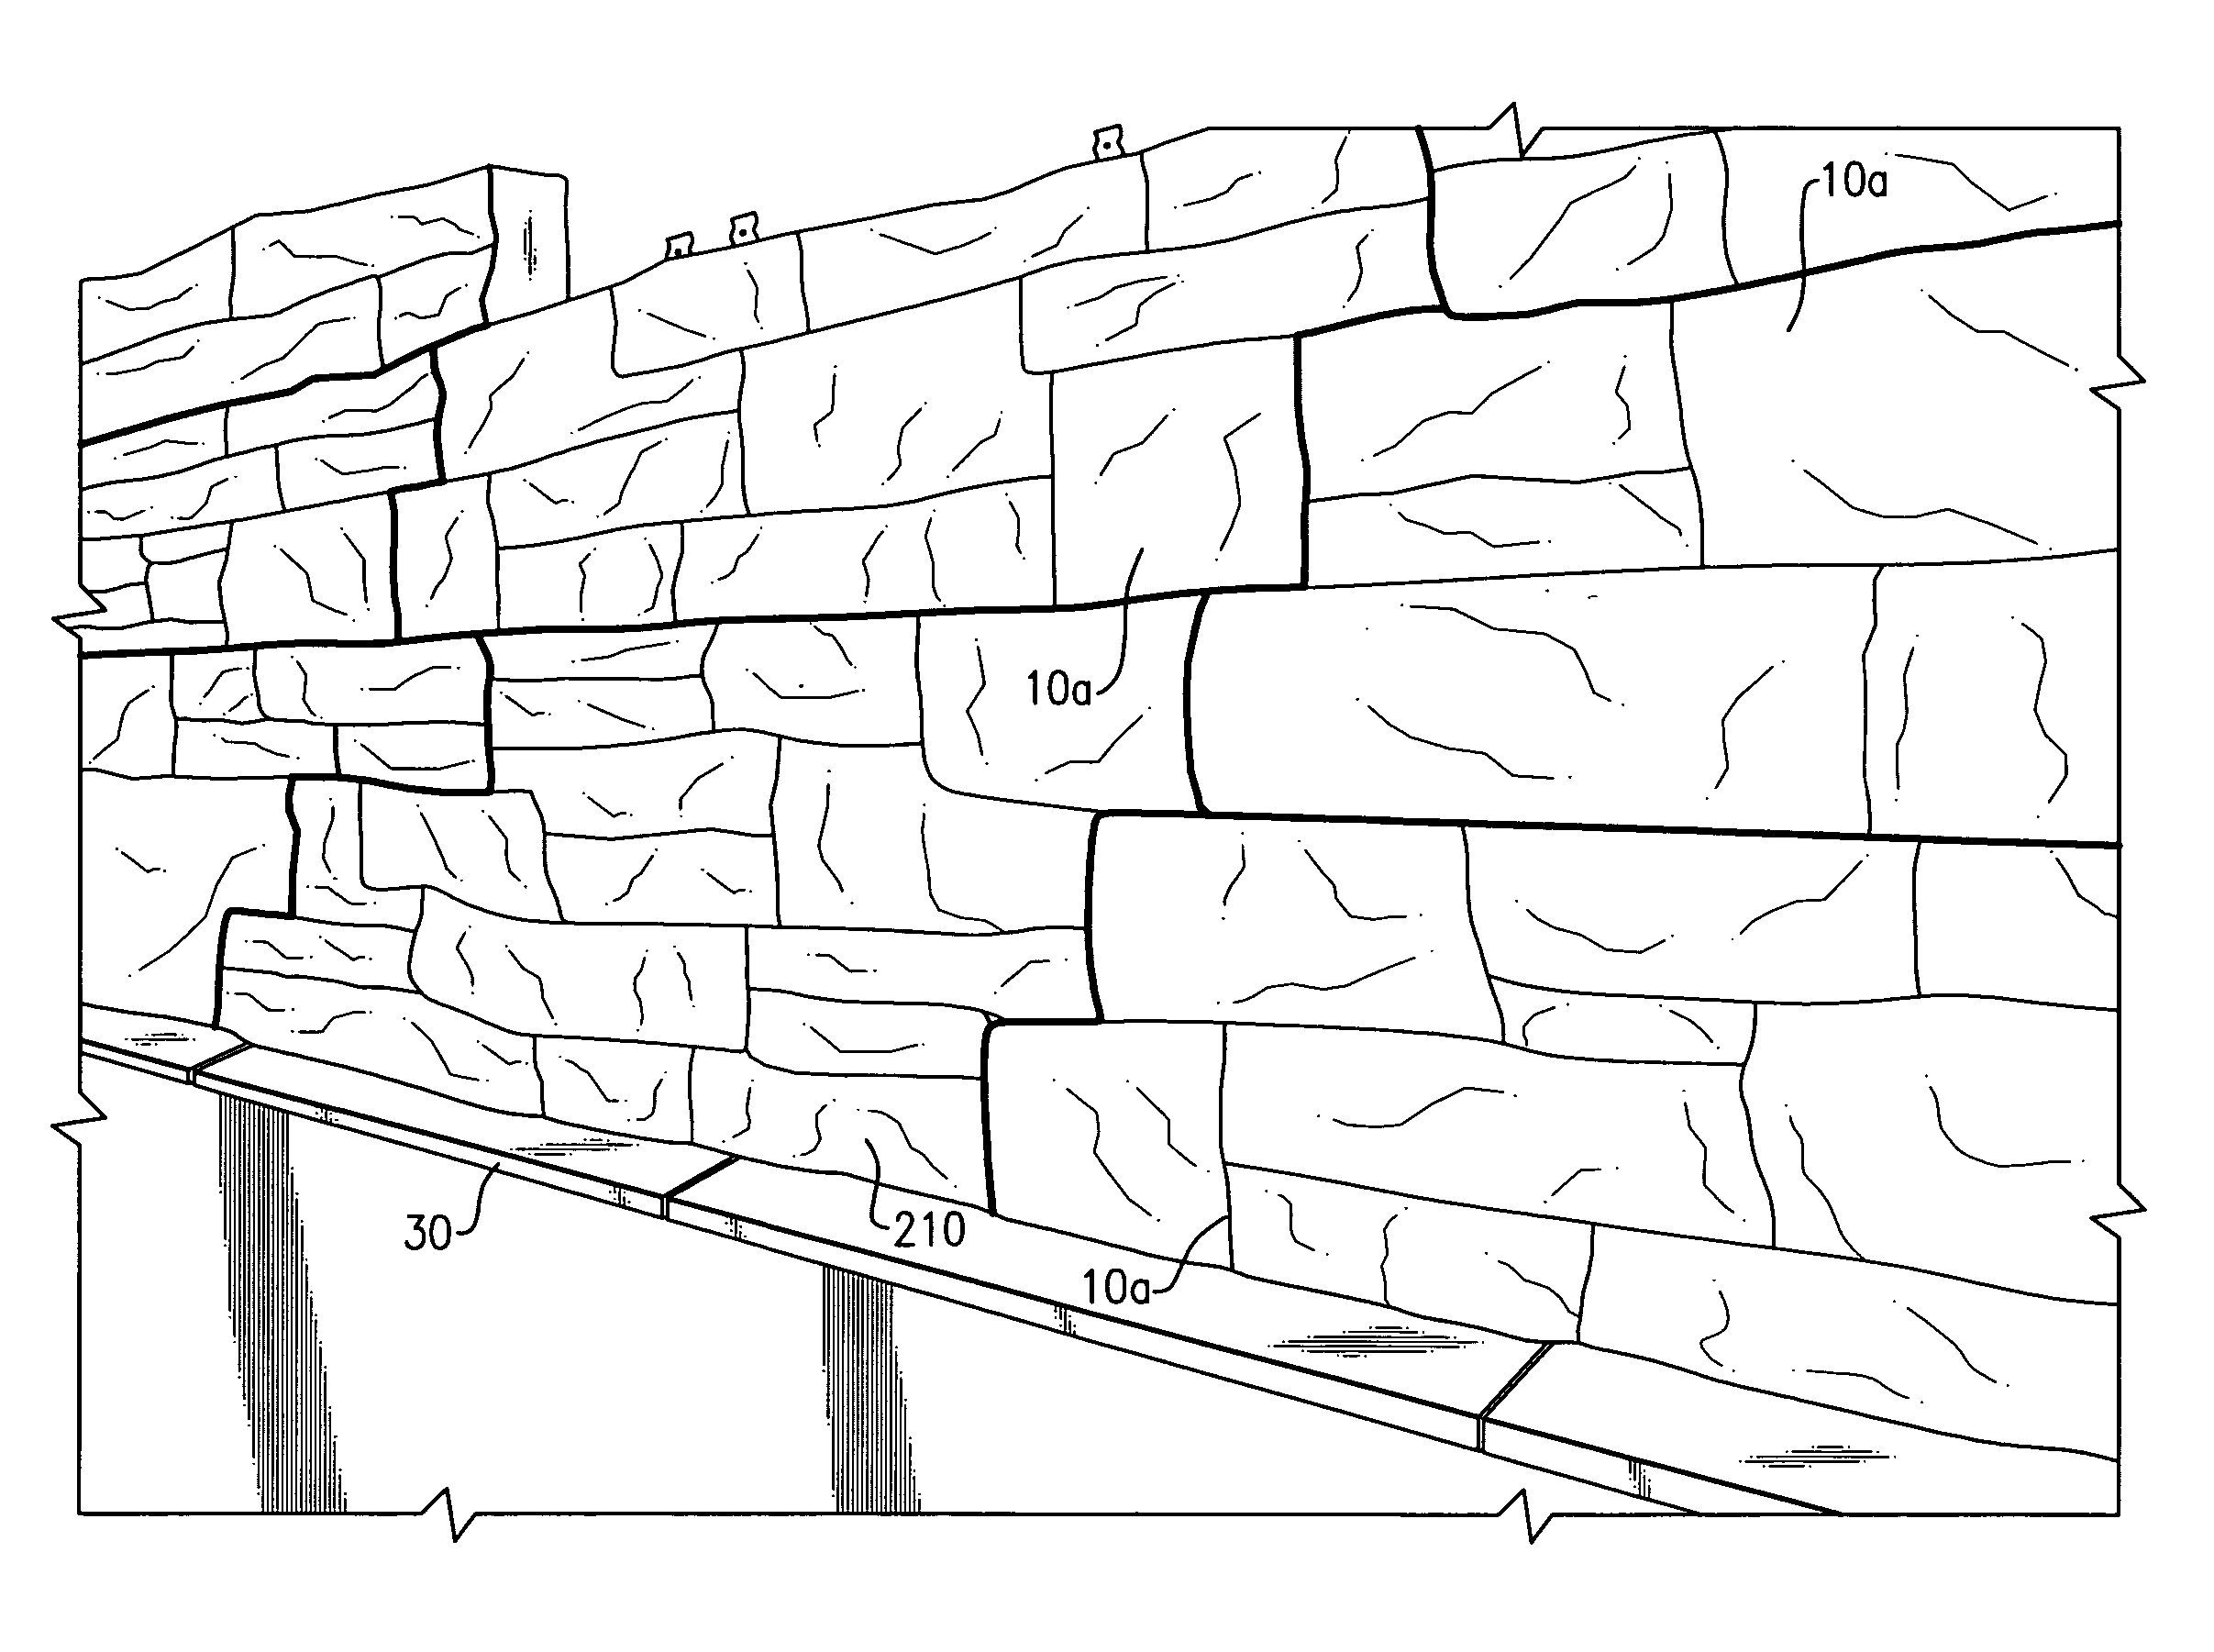 Faux-stone architectural panel system